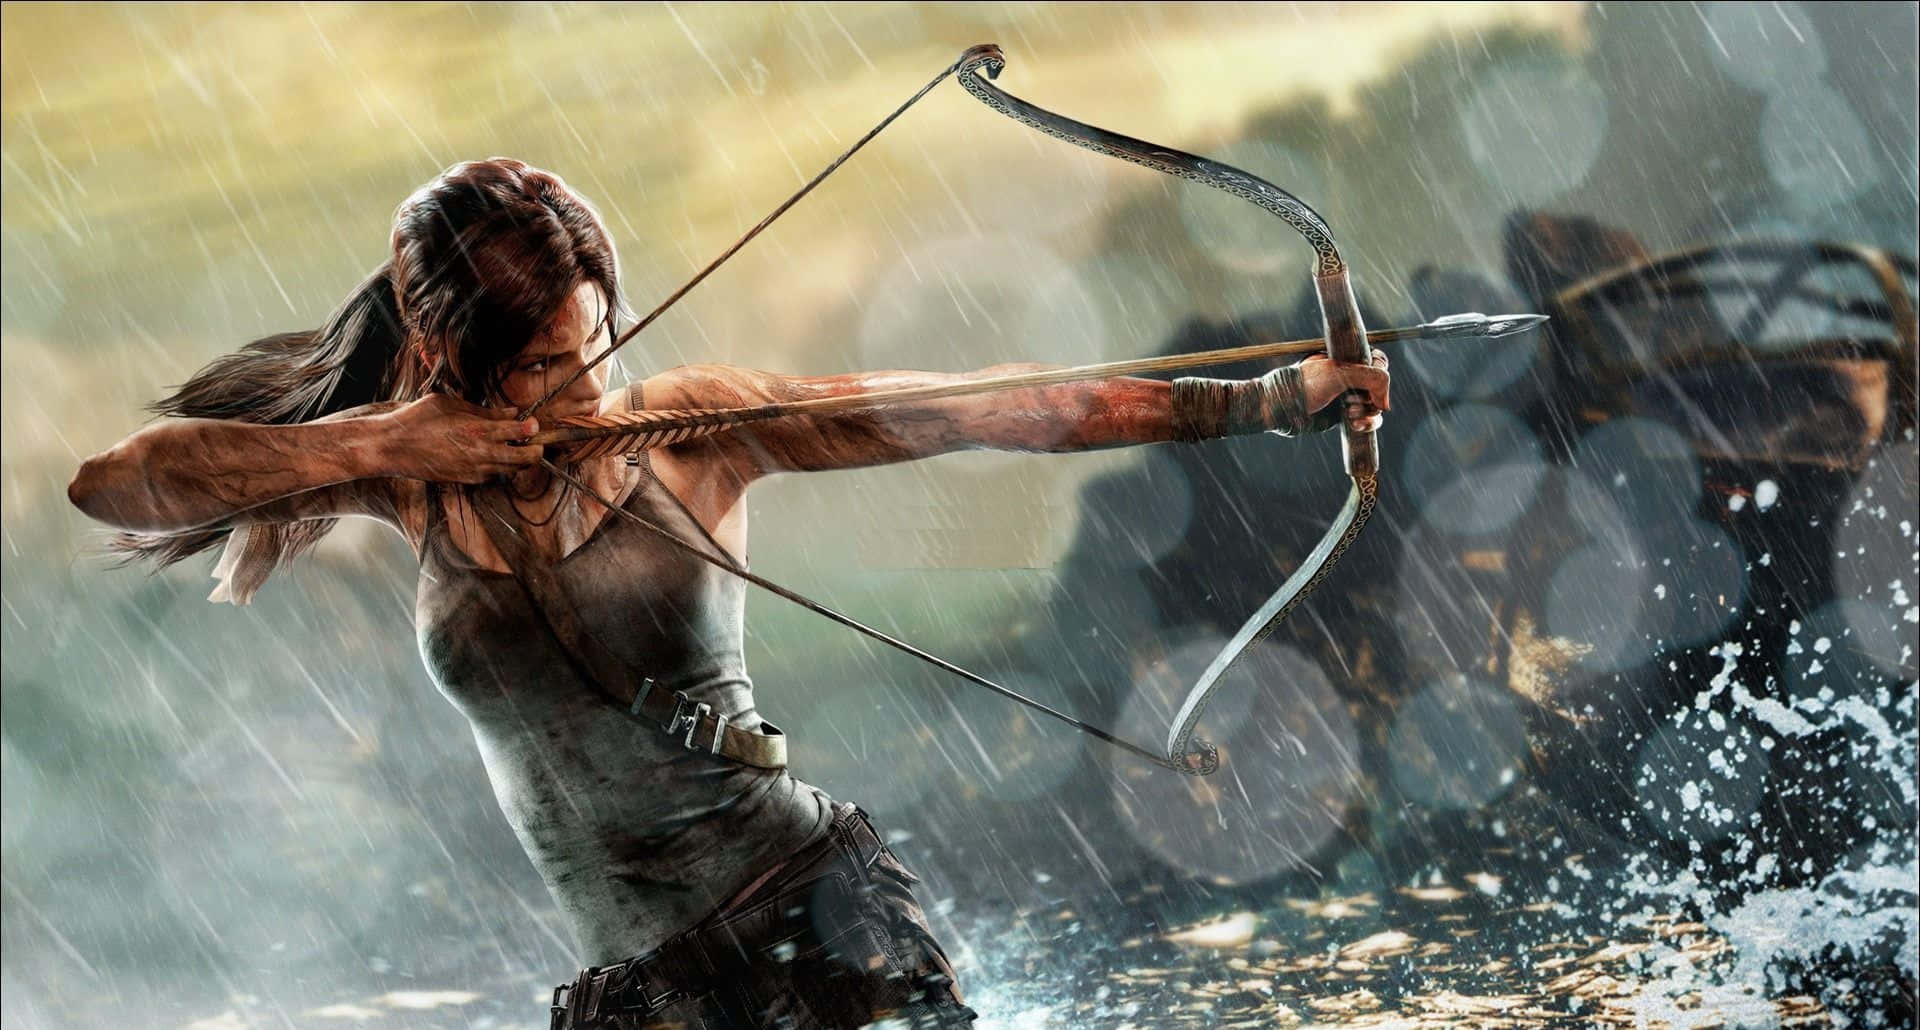 Lara Croft Doing Archery Training In The Middle Of The Rain 1920x1080 Rise Of The Tomb Raider Background